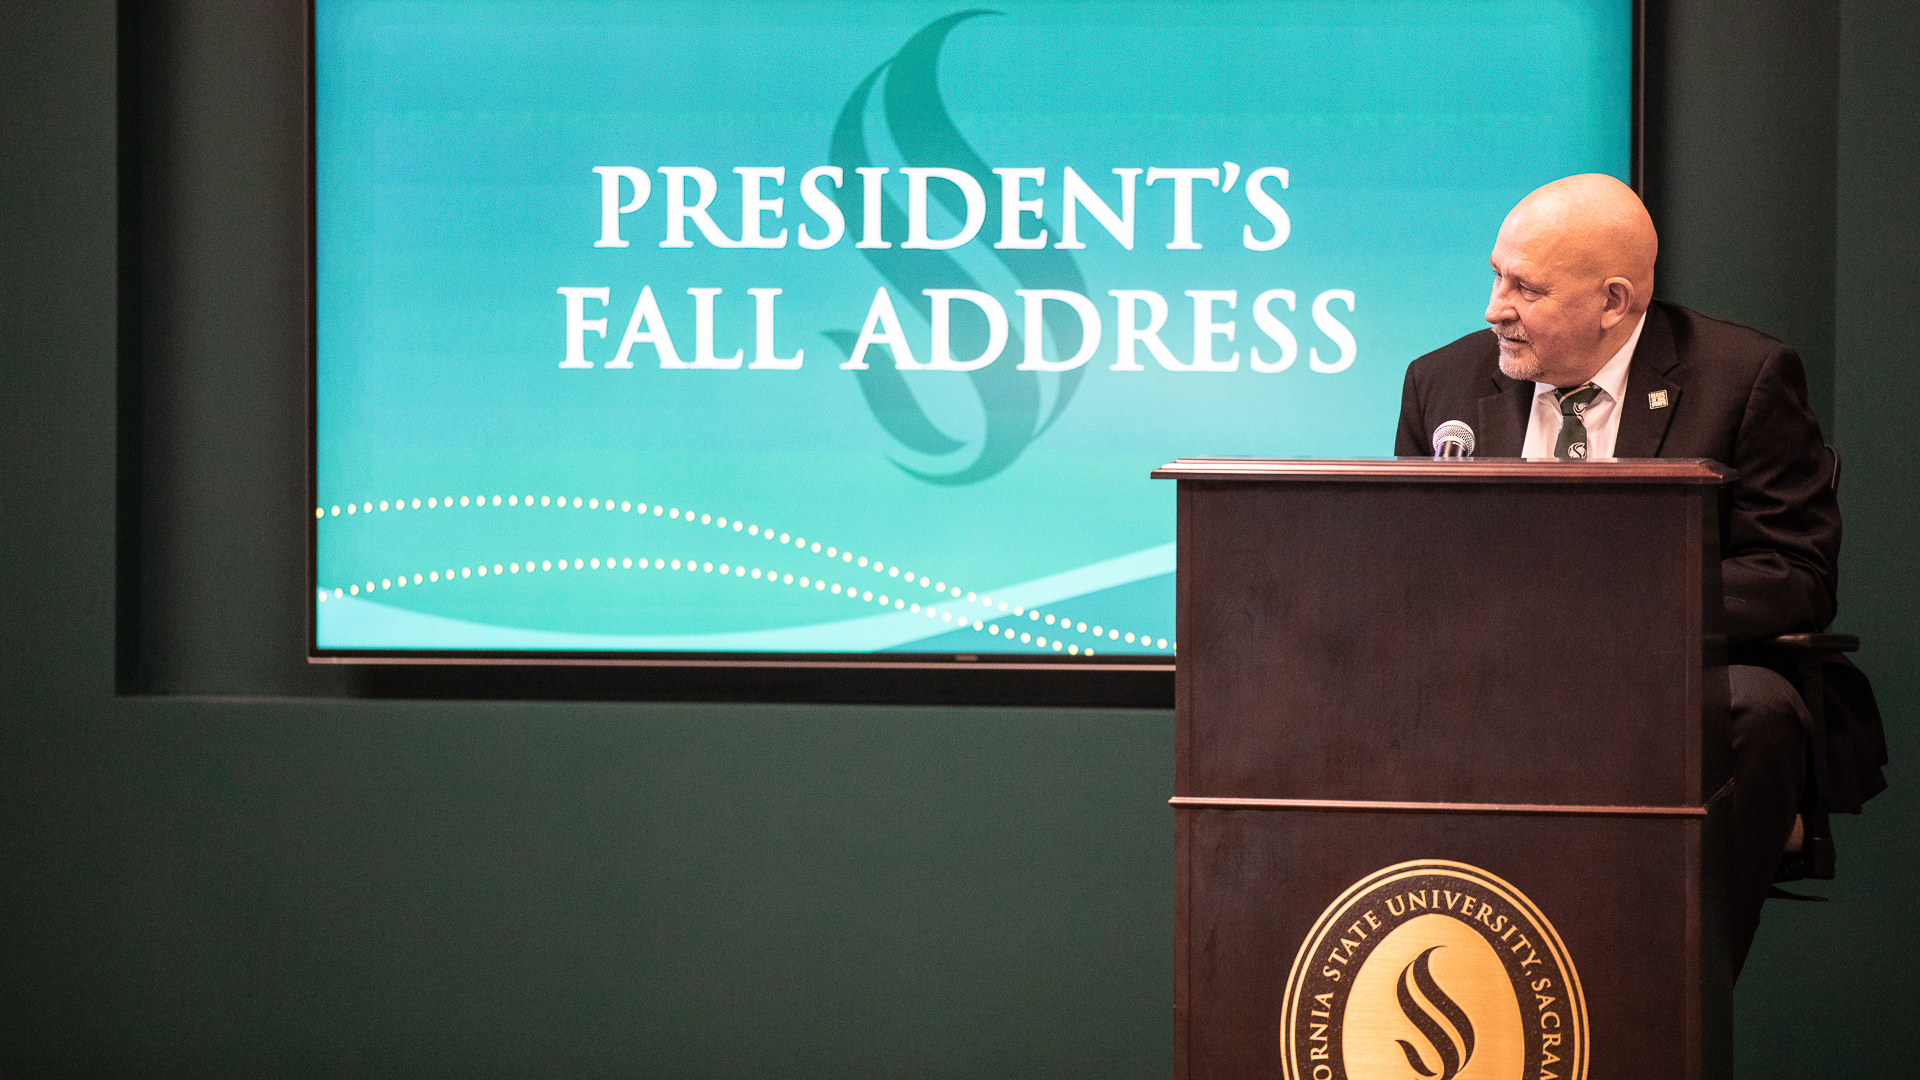 in-fall-address-president-will-welcome-back-campus-community-and-tout-successes-amid-trying